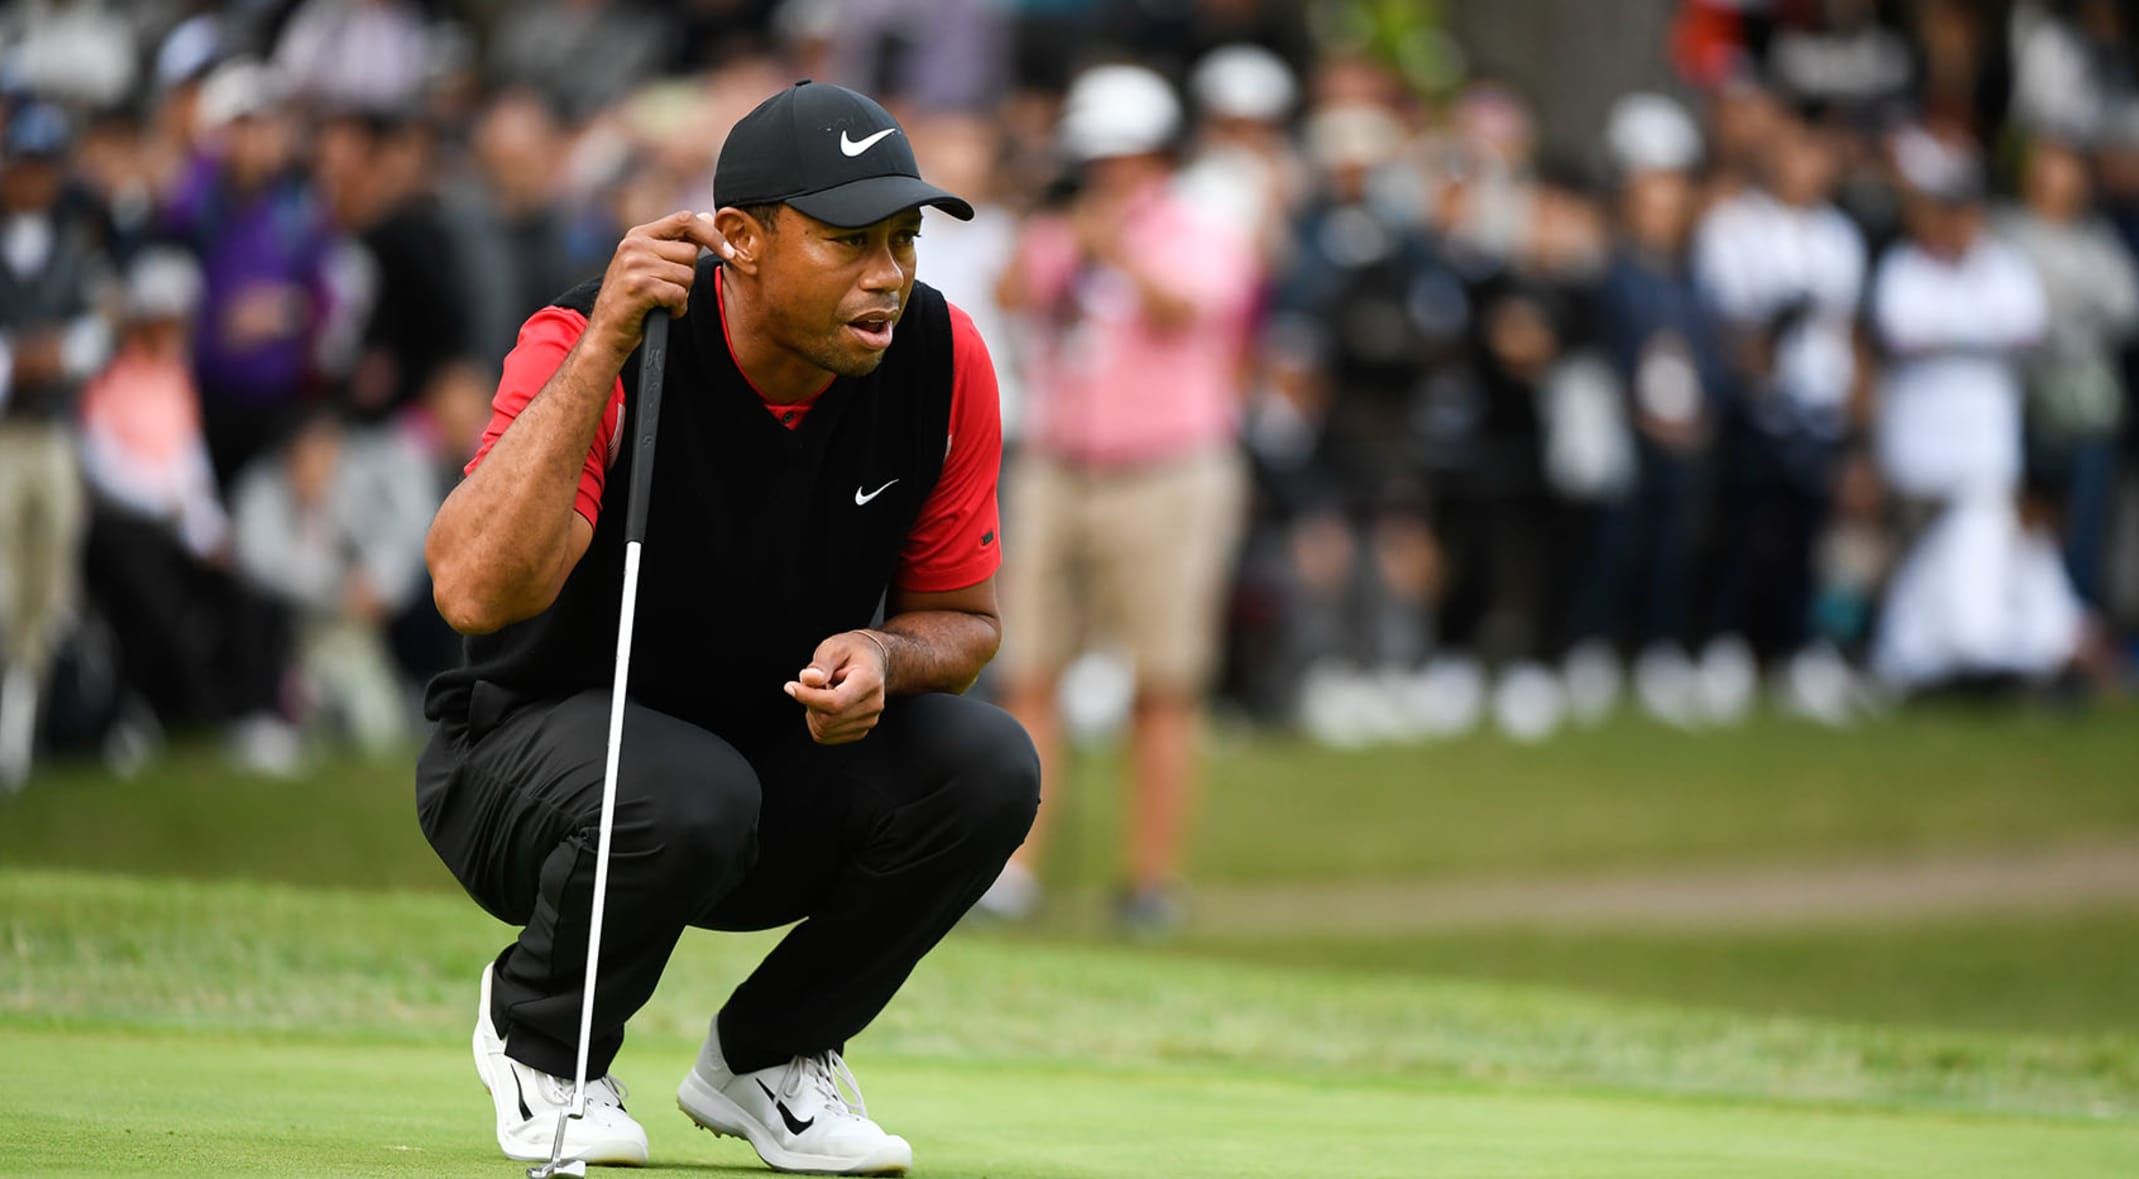 Tiger Woods Leads In Final Round At Zozo Championship